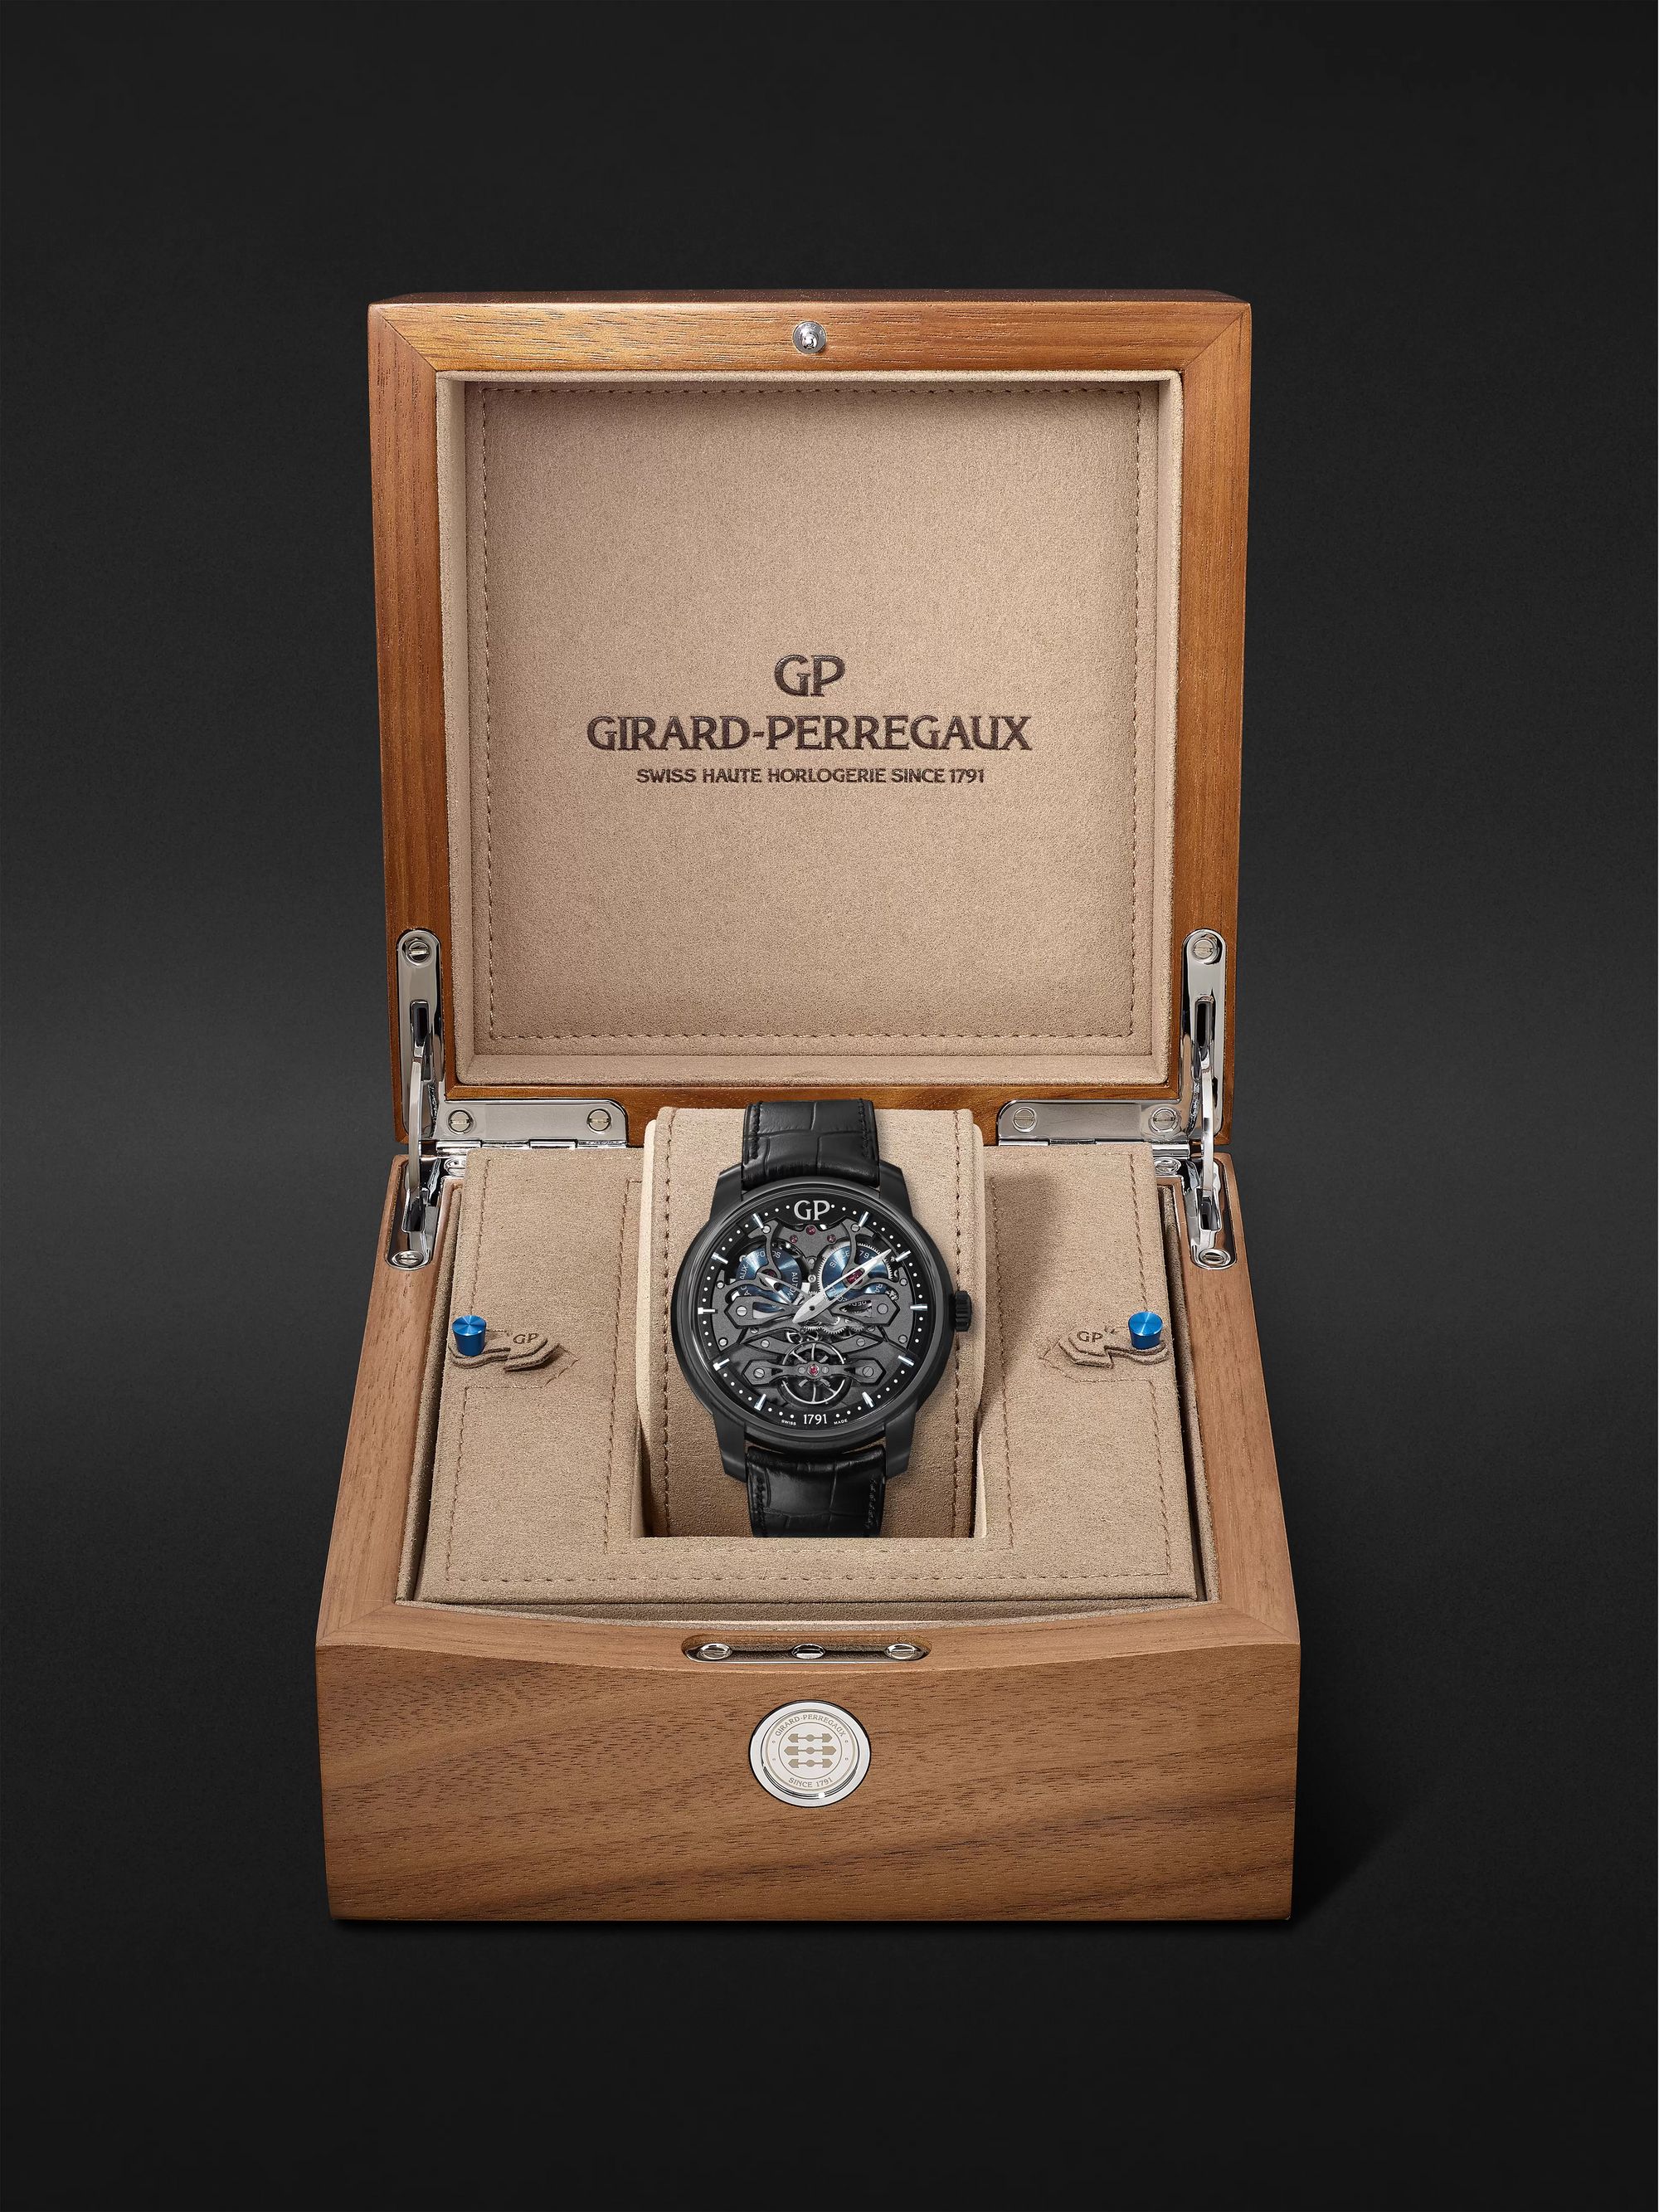 GIRARD-PERREGAUX Neo Bridges Earth to Sky Automatic 45mm Titanium and Alligator Watch, Ref. No. 84000-21-632-BH6A